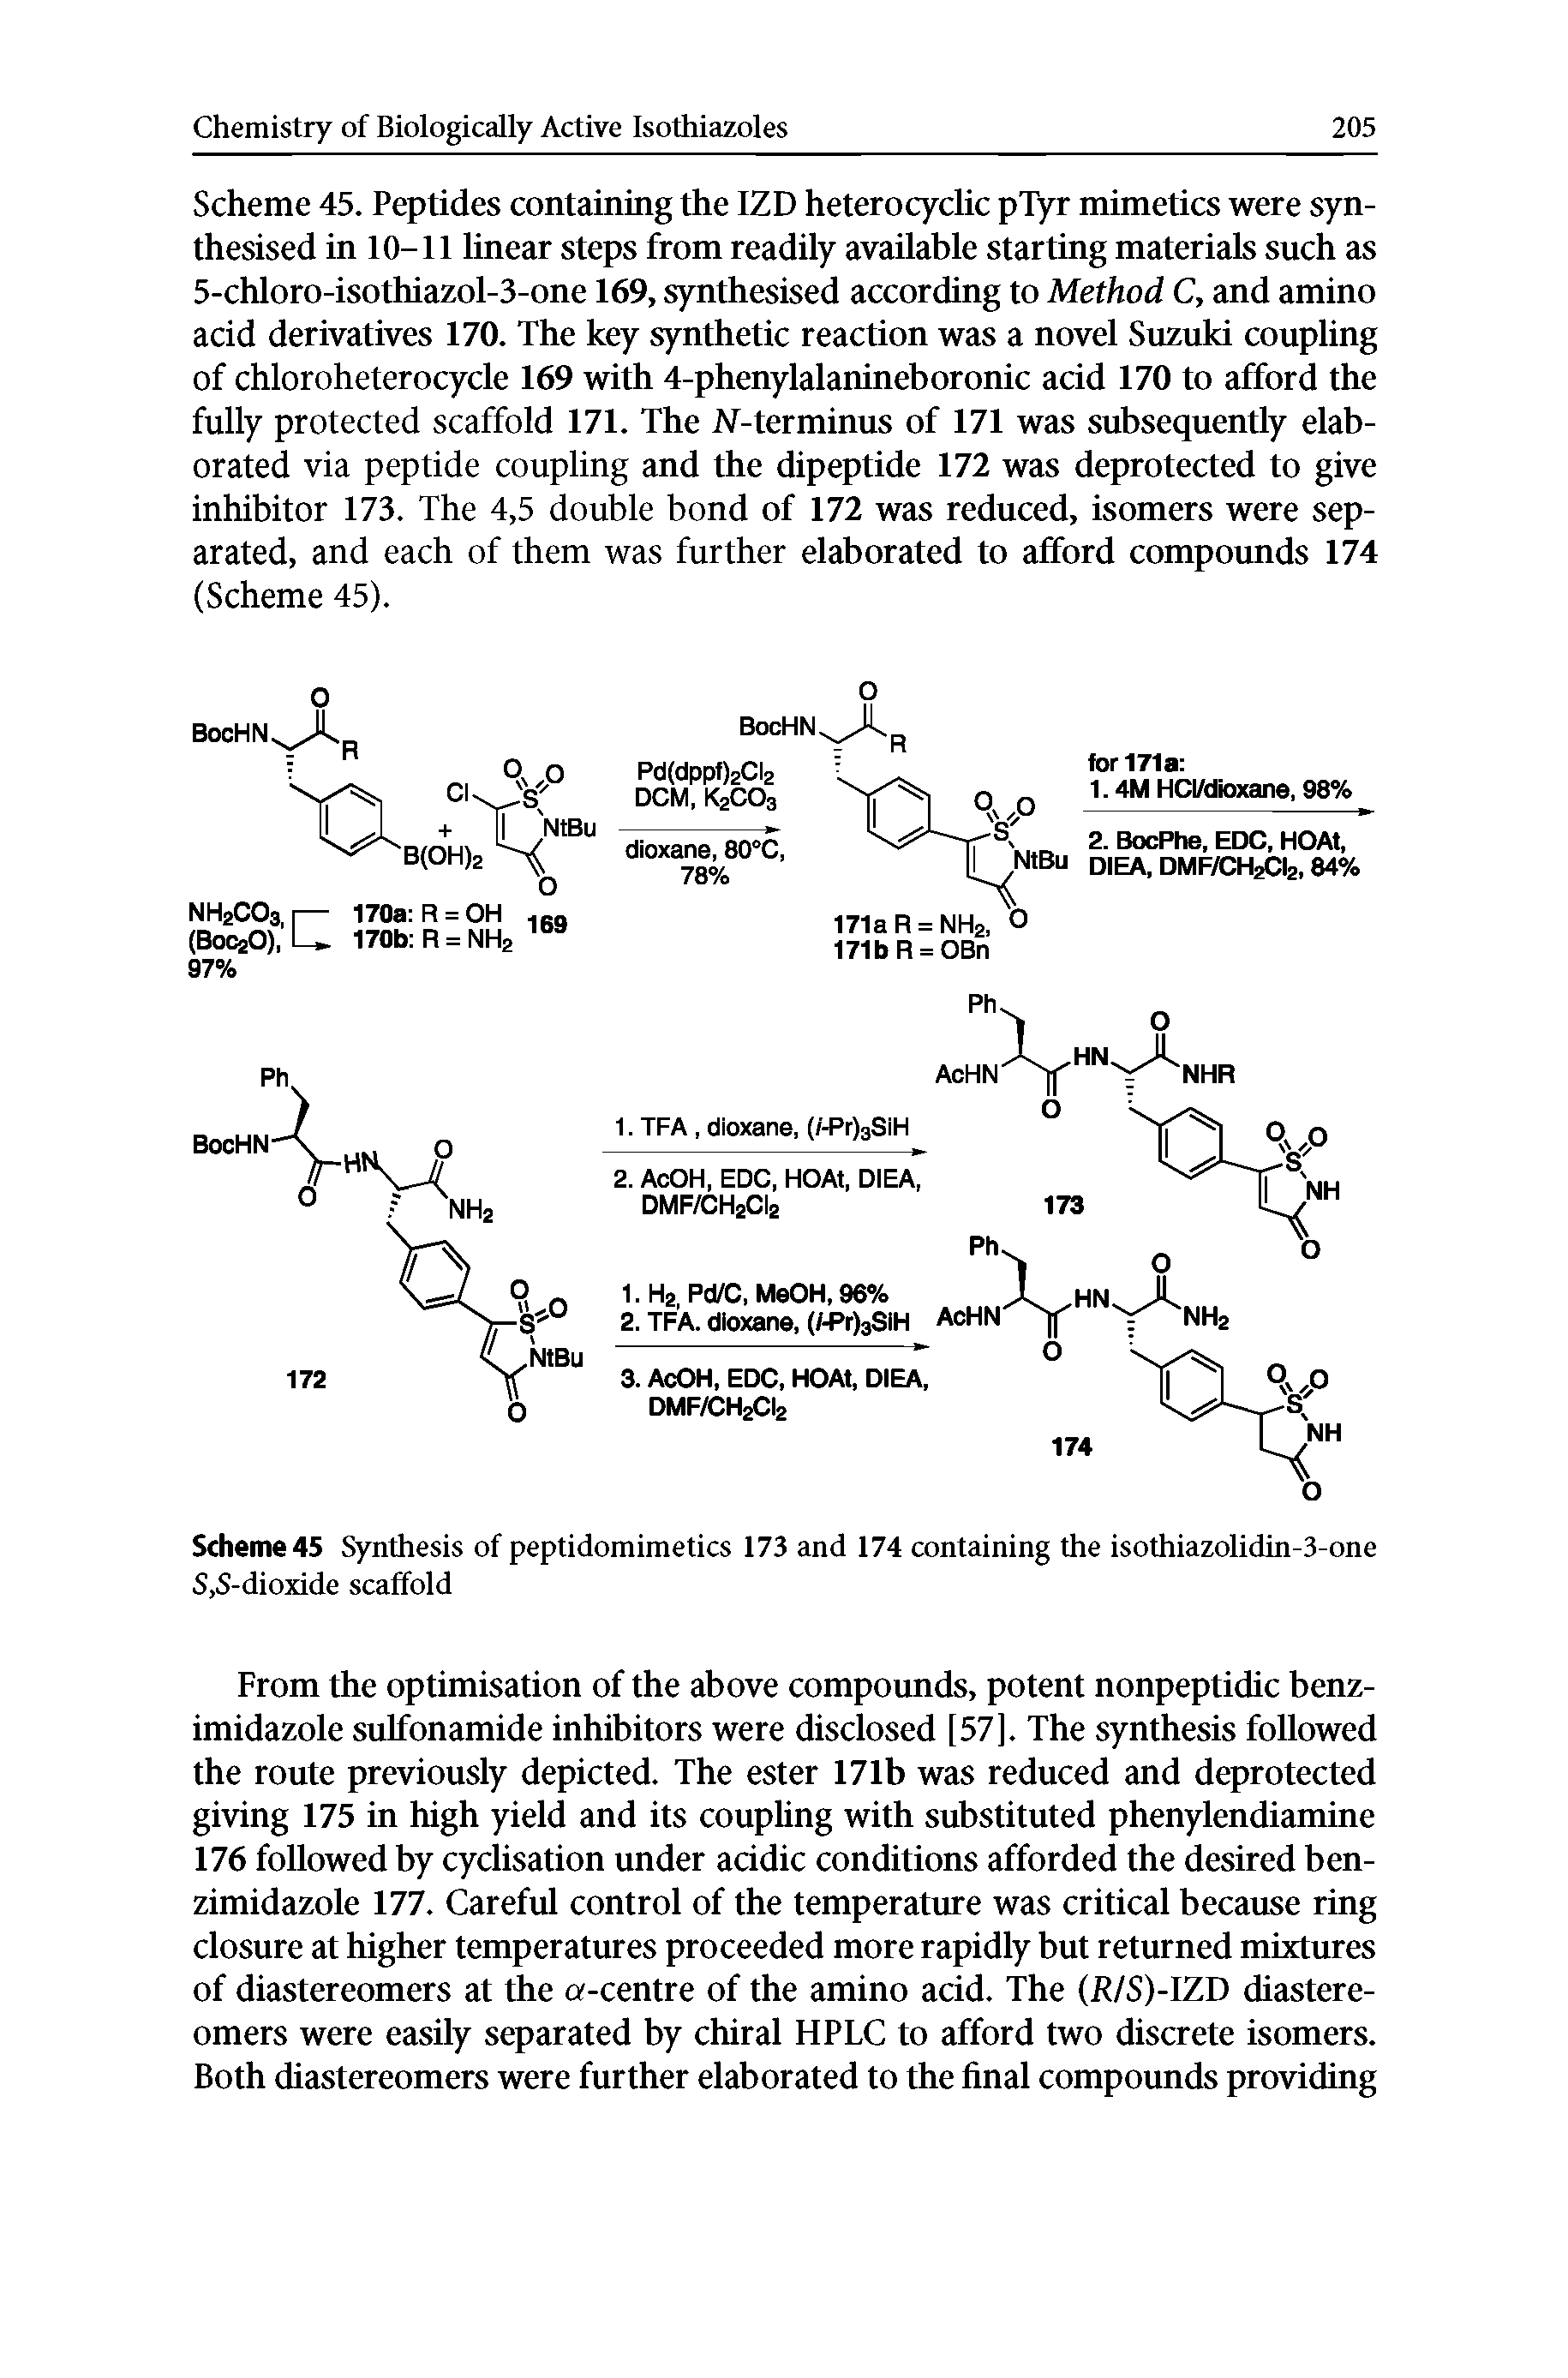 Scheme 45. Peptides containing the IZD heterocyclic pTyr mimetics were synthesised in 10-11 linear steps from readily available starting materials such as 5-chloro-isothiazol-3-one 169, synthesised according to Method C, and amino acid derivatives 170. The key synthetic reaction was a novel Suzuki coupling of chloroheterocycle 169 with 4-phenylalanineboronic acid 170 to afford the fully protected scaffold 171. The J -terminus of 171 was subsequently elaborated via peptide coupling and the dipeptide 172 was deprotected to give inhibitor 173. The 4,5 double bond of 172 was reduced, isomers were separated, and each of them was further elaborated to afford compoimds 174 (Scheme 45).